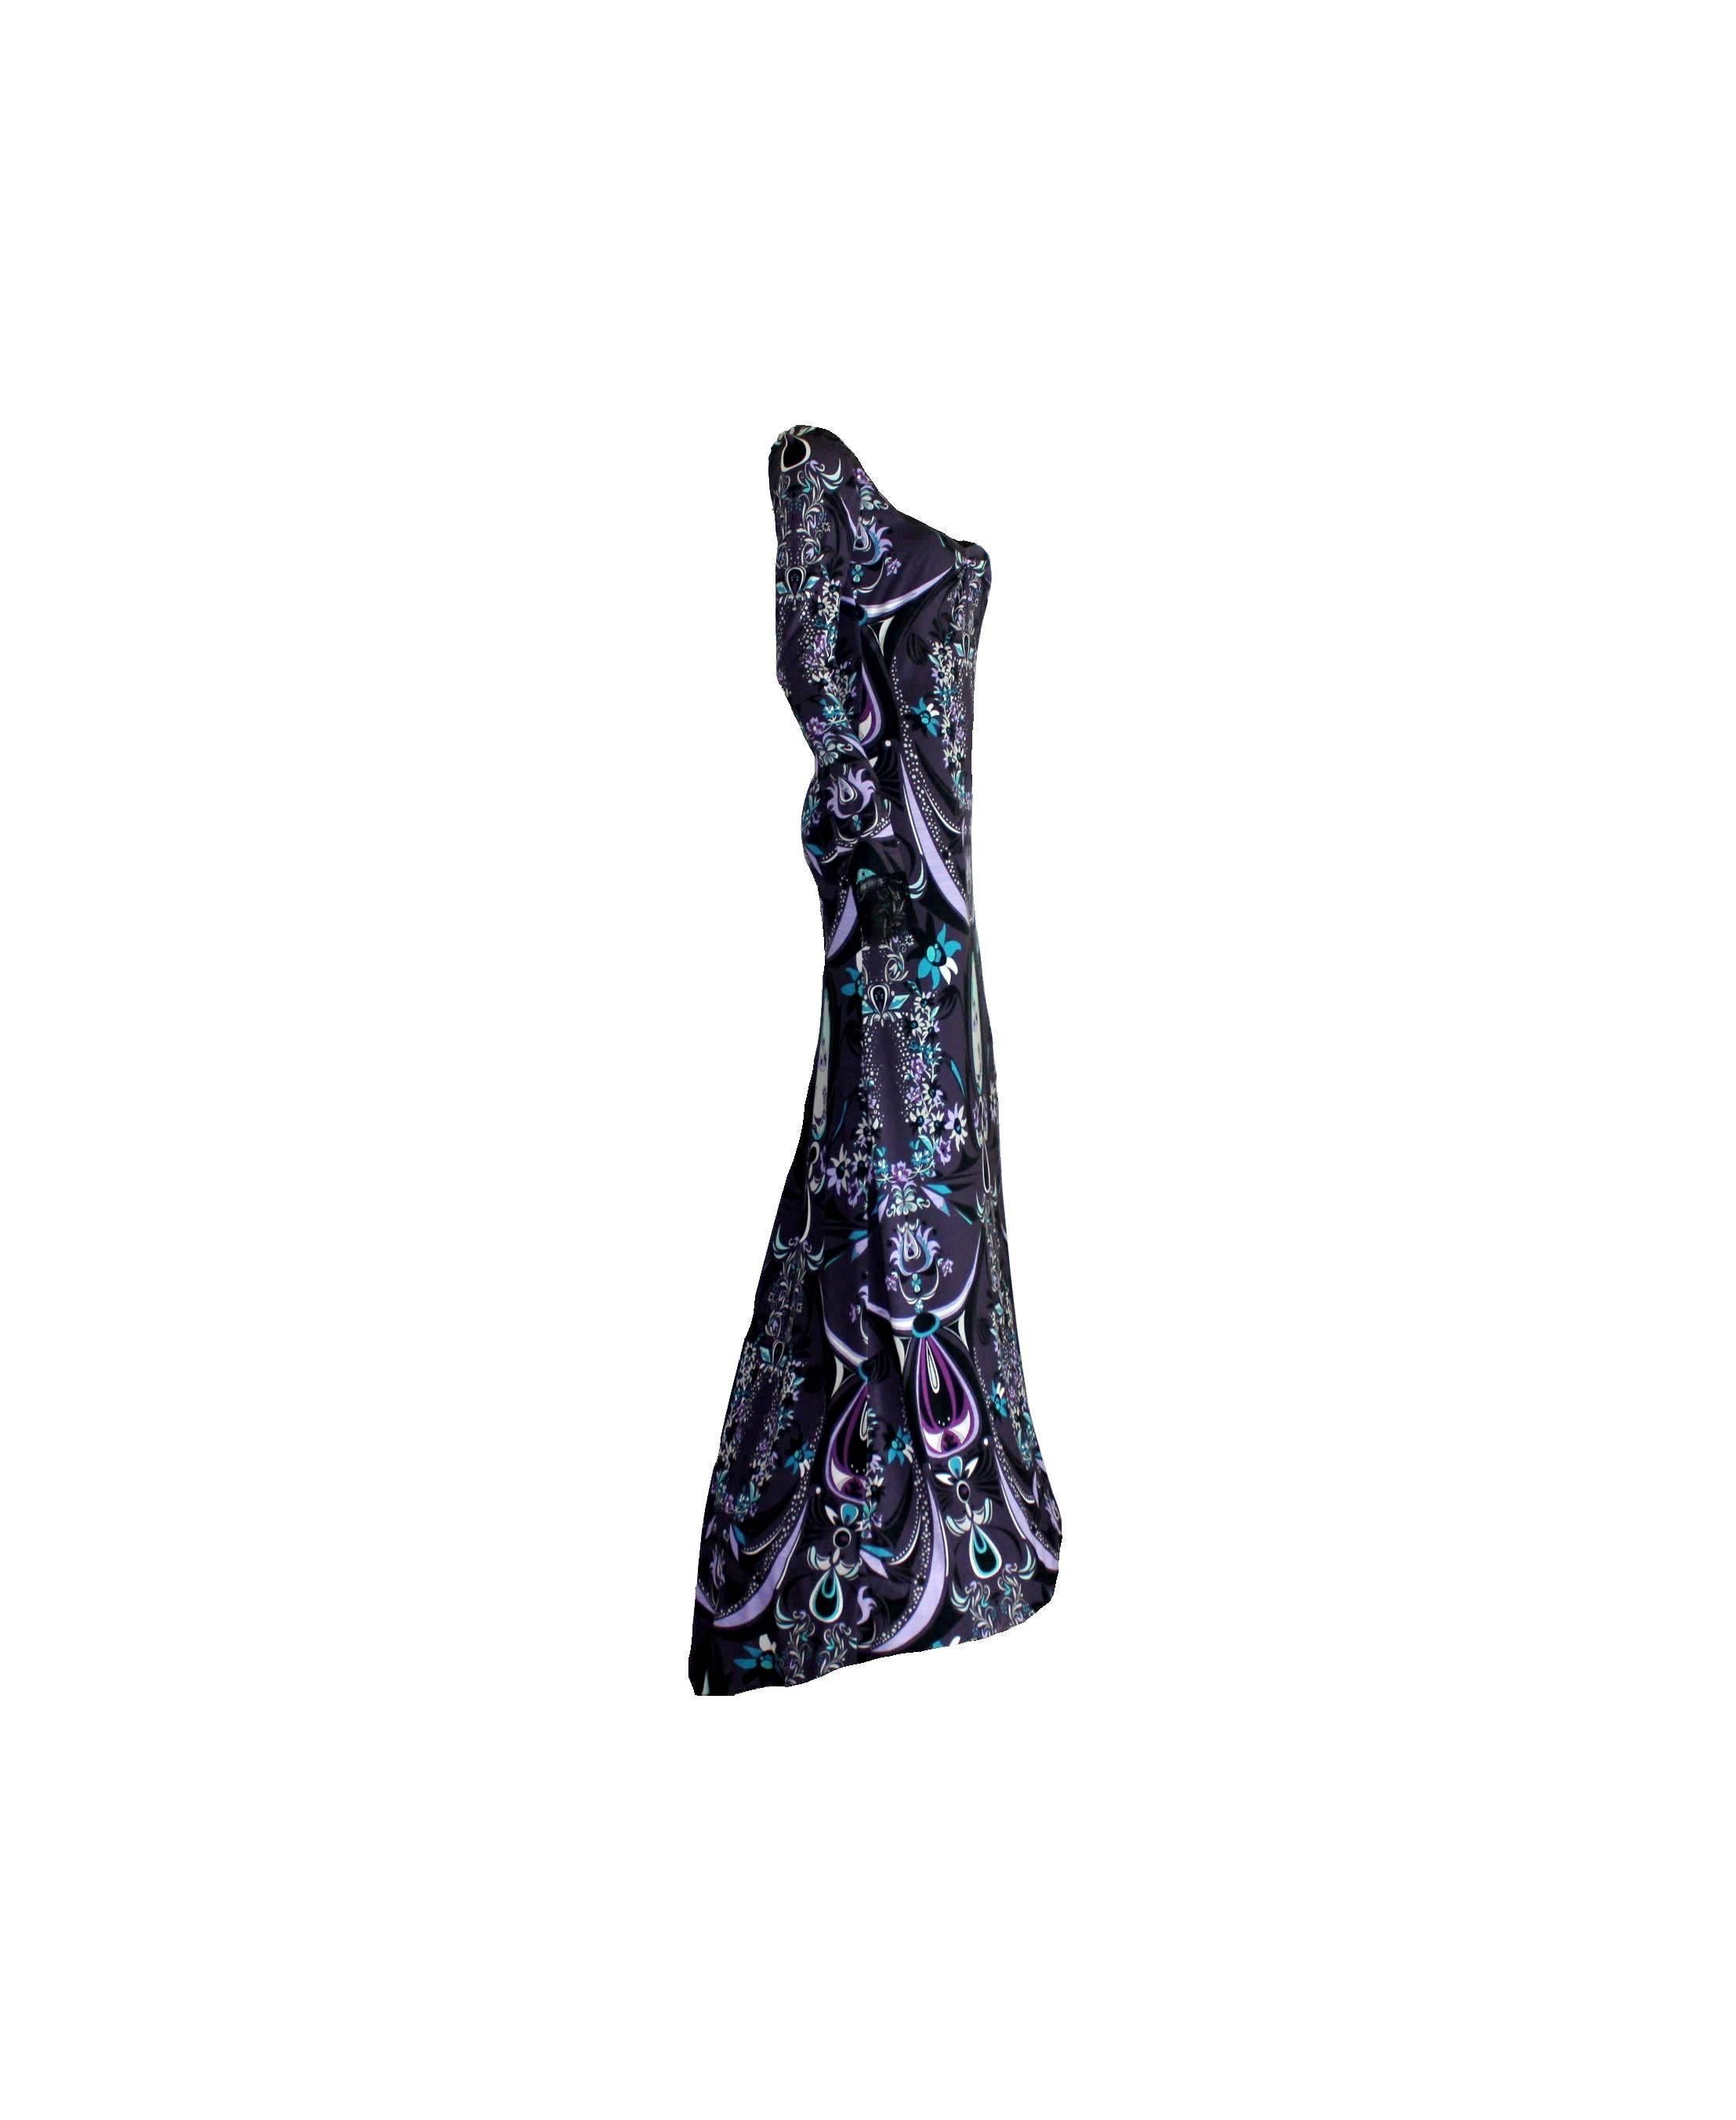 A true head-turner!
Amazing Emilio Pucci evening gown
In the brand's famous signature print
